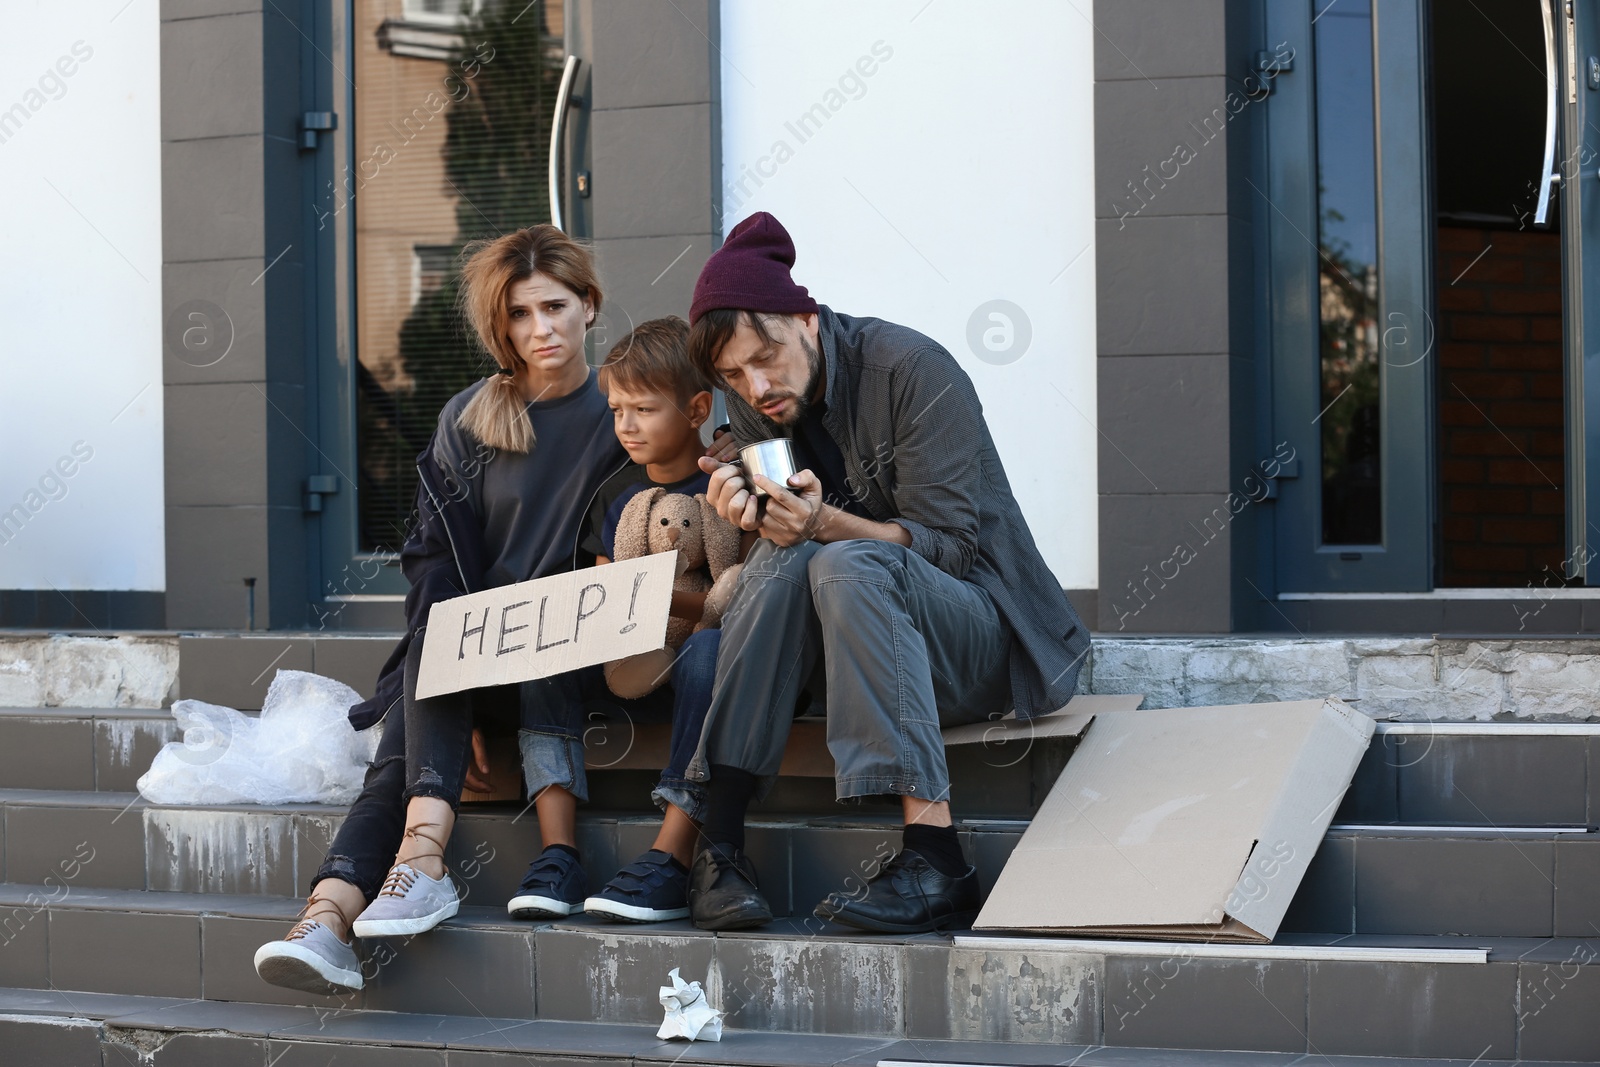 Photo of Poor homeless family begging and asking for help on city street